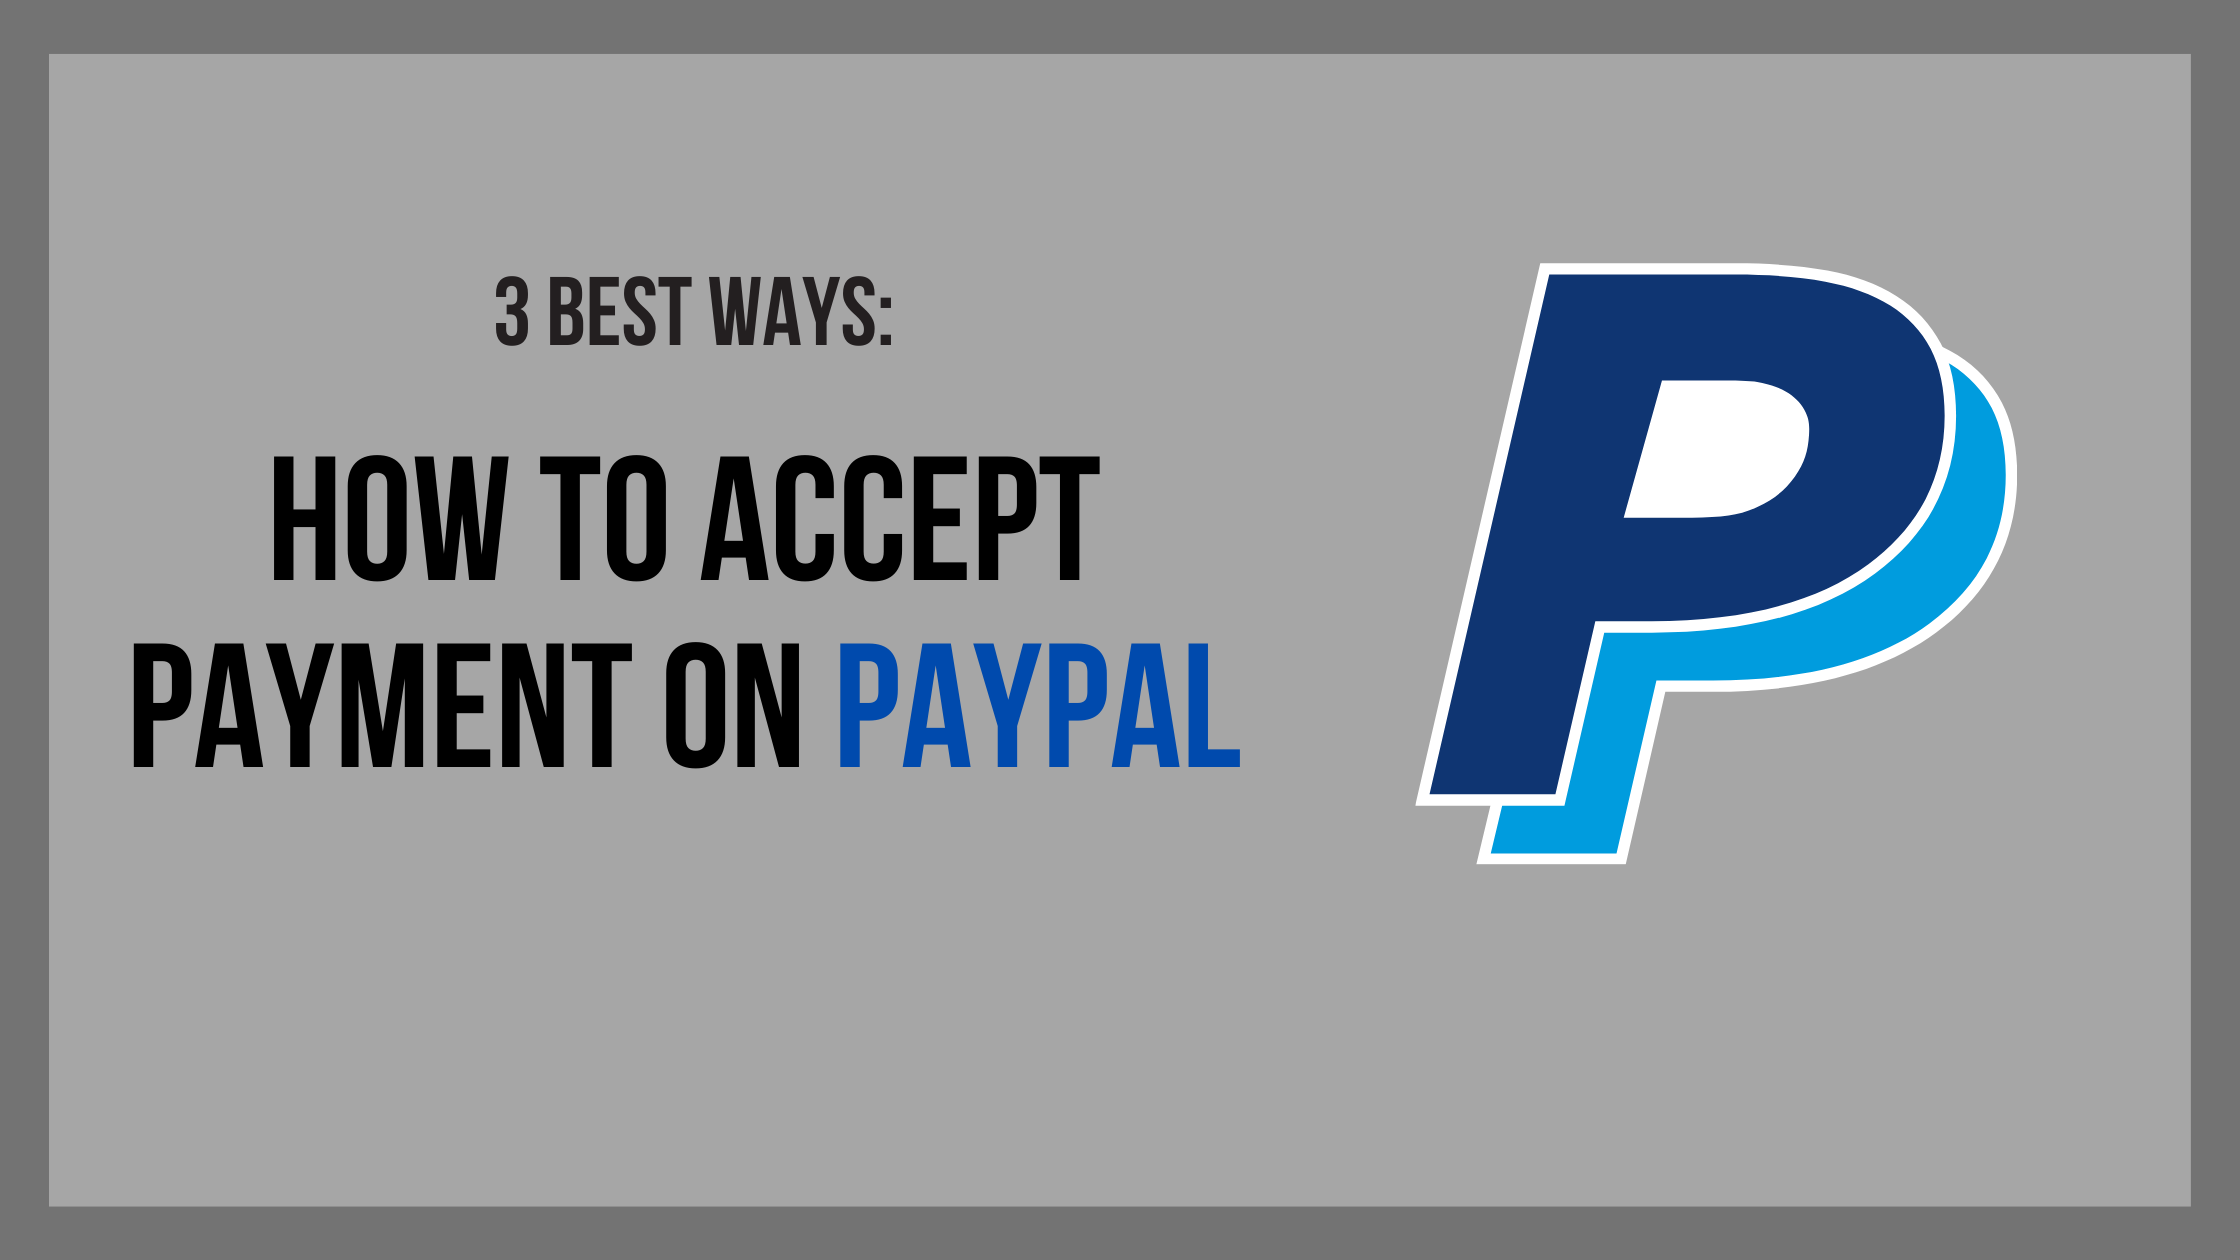 How to accept payment on PayPal